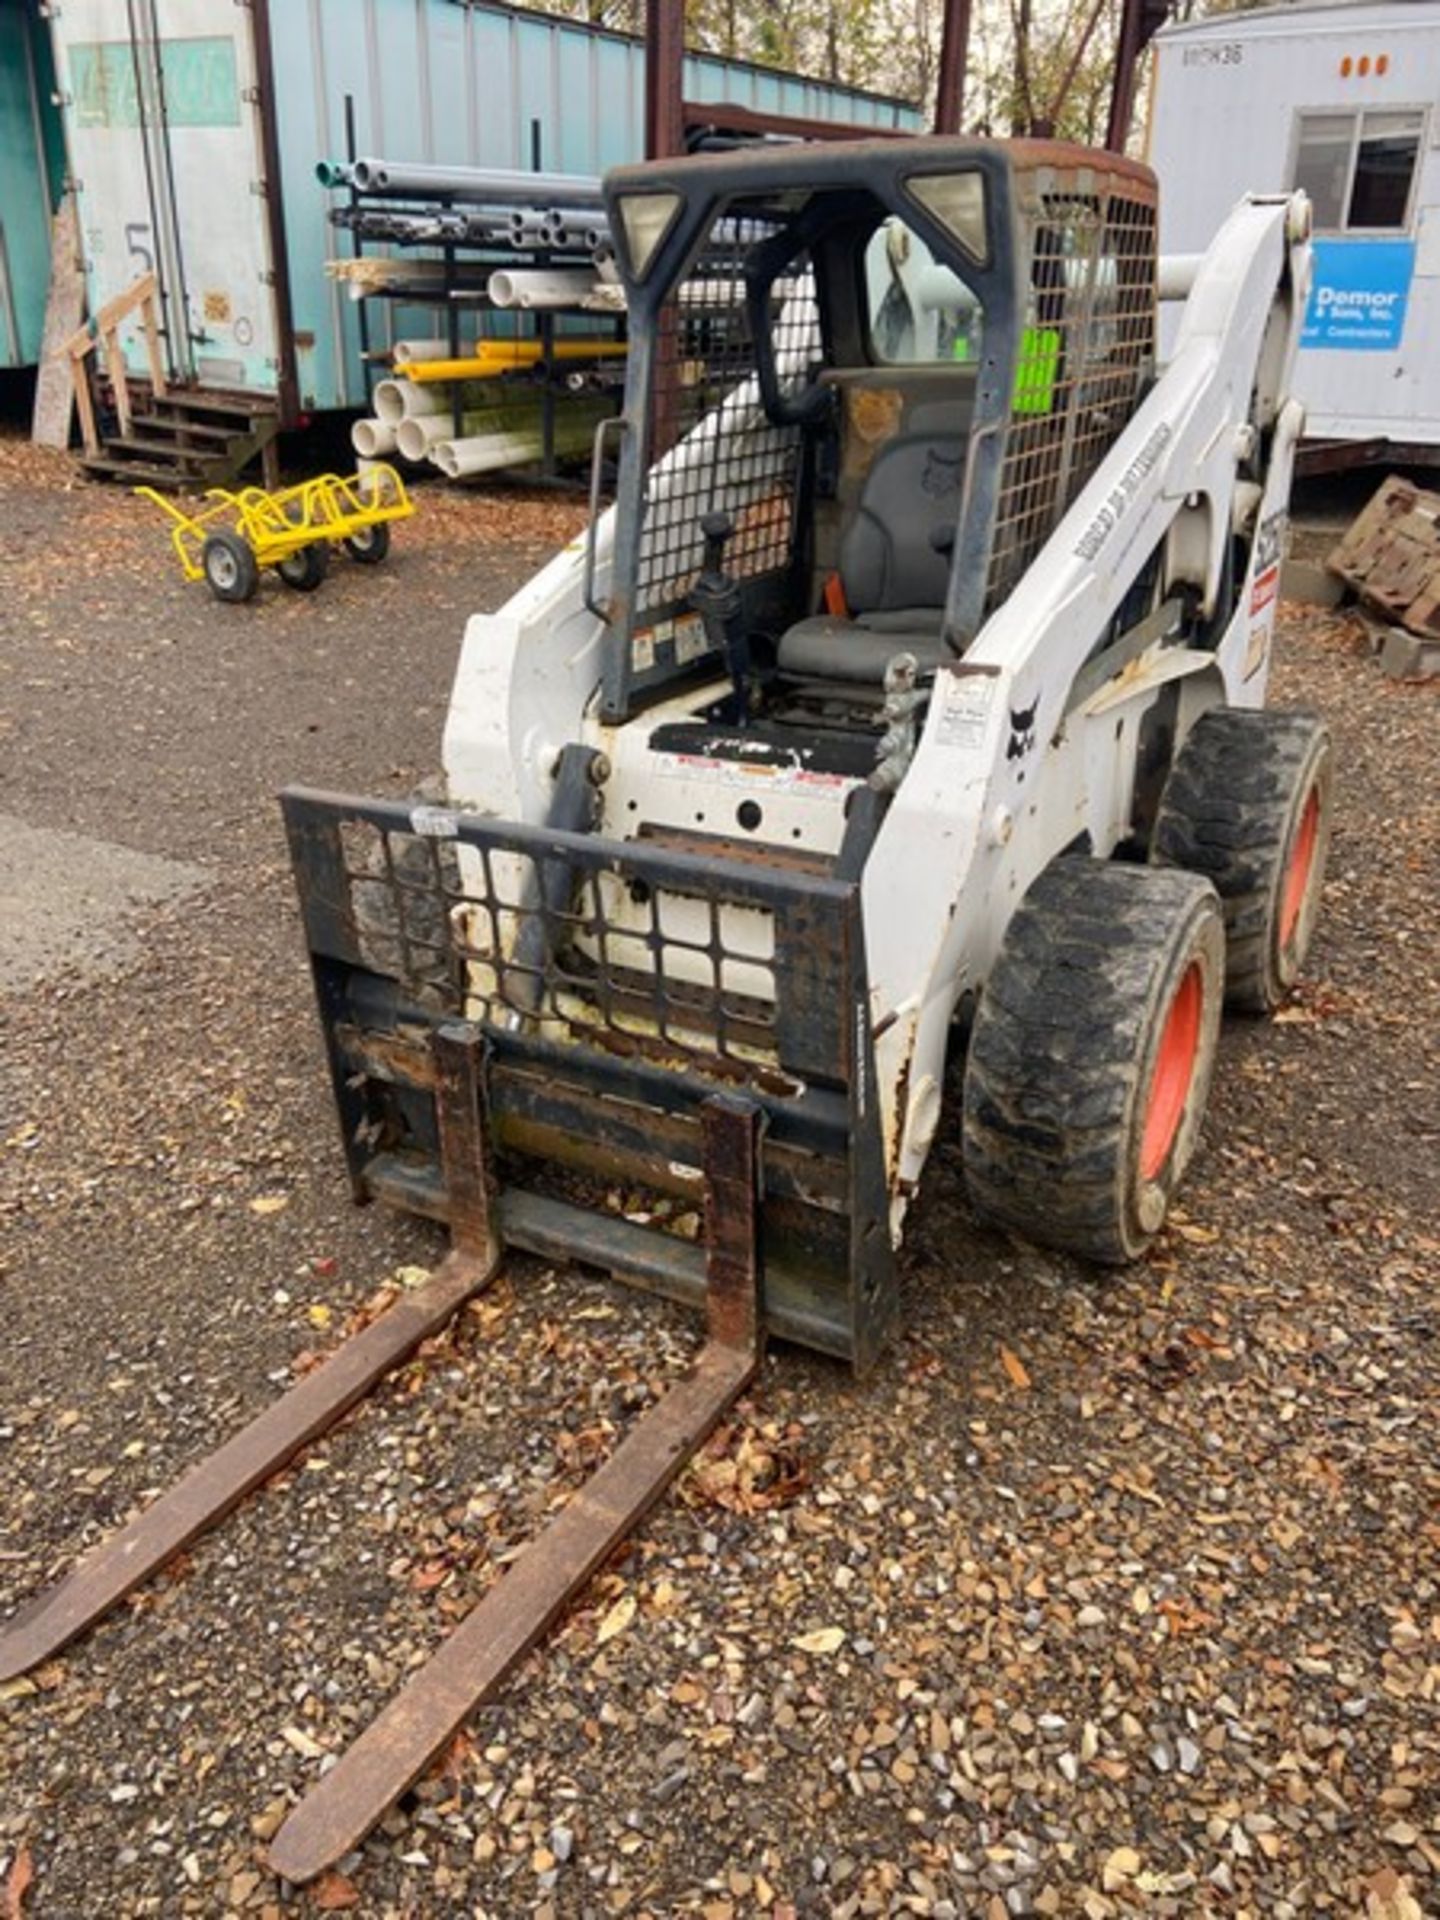 2010 Bobcat S250 Compact Skid Steer, VIN#: A5GM36985, with Fork Attachment (NOTE: DELAYED REMOVAL - Image 3 of 12